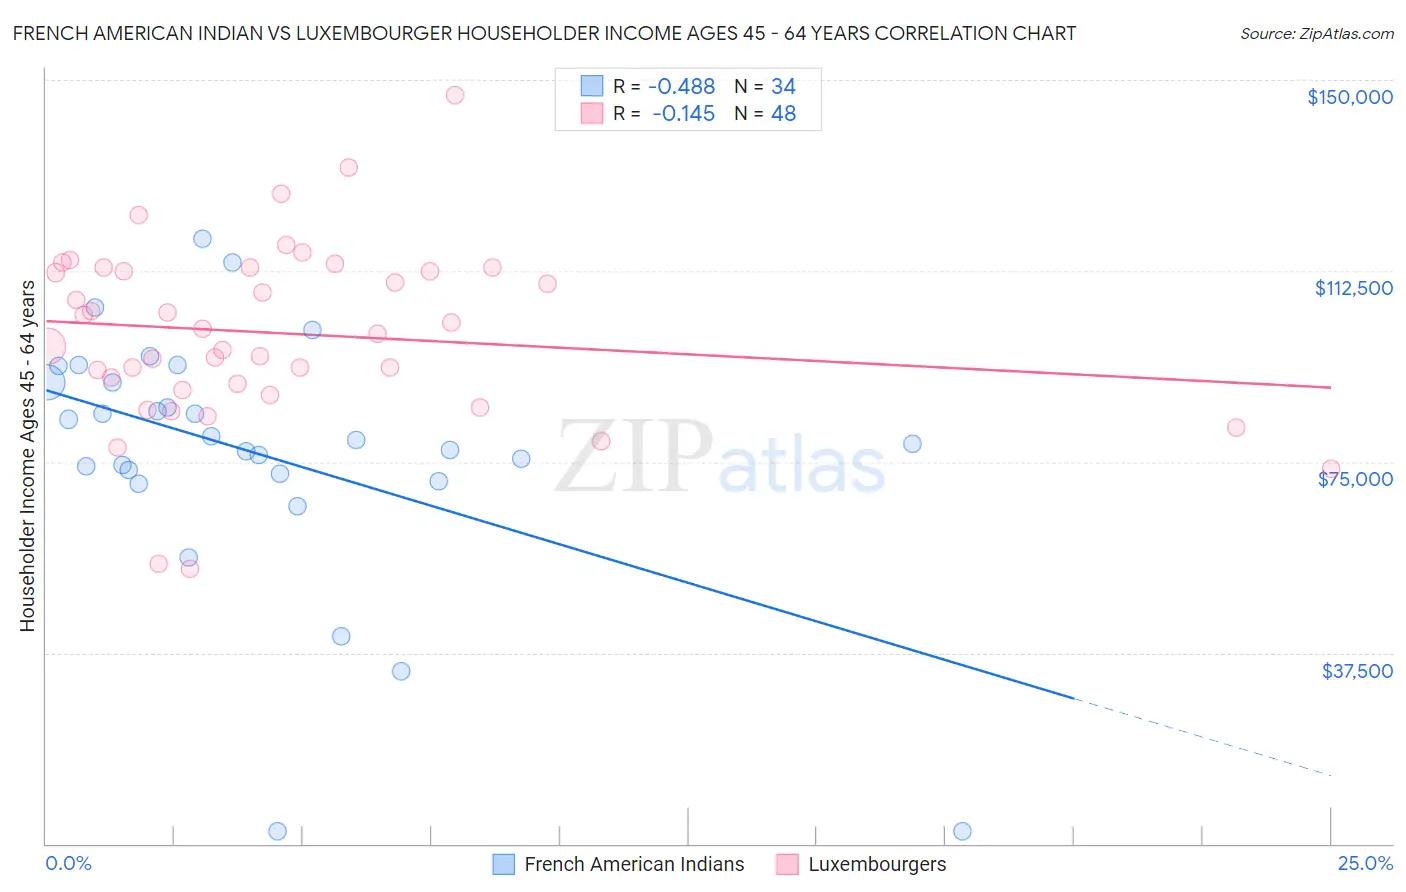 French American Indian vs Luxembourger Householder Income Ages 45 - 64 years